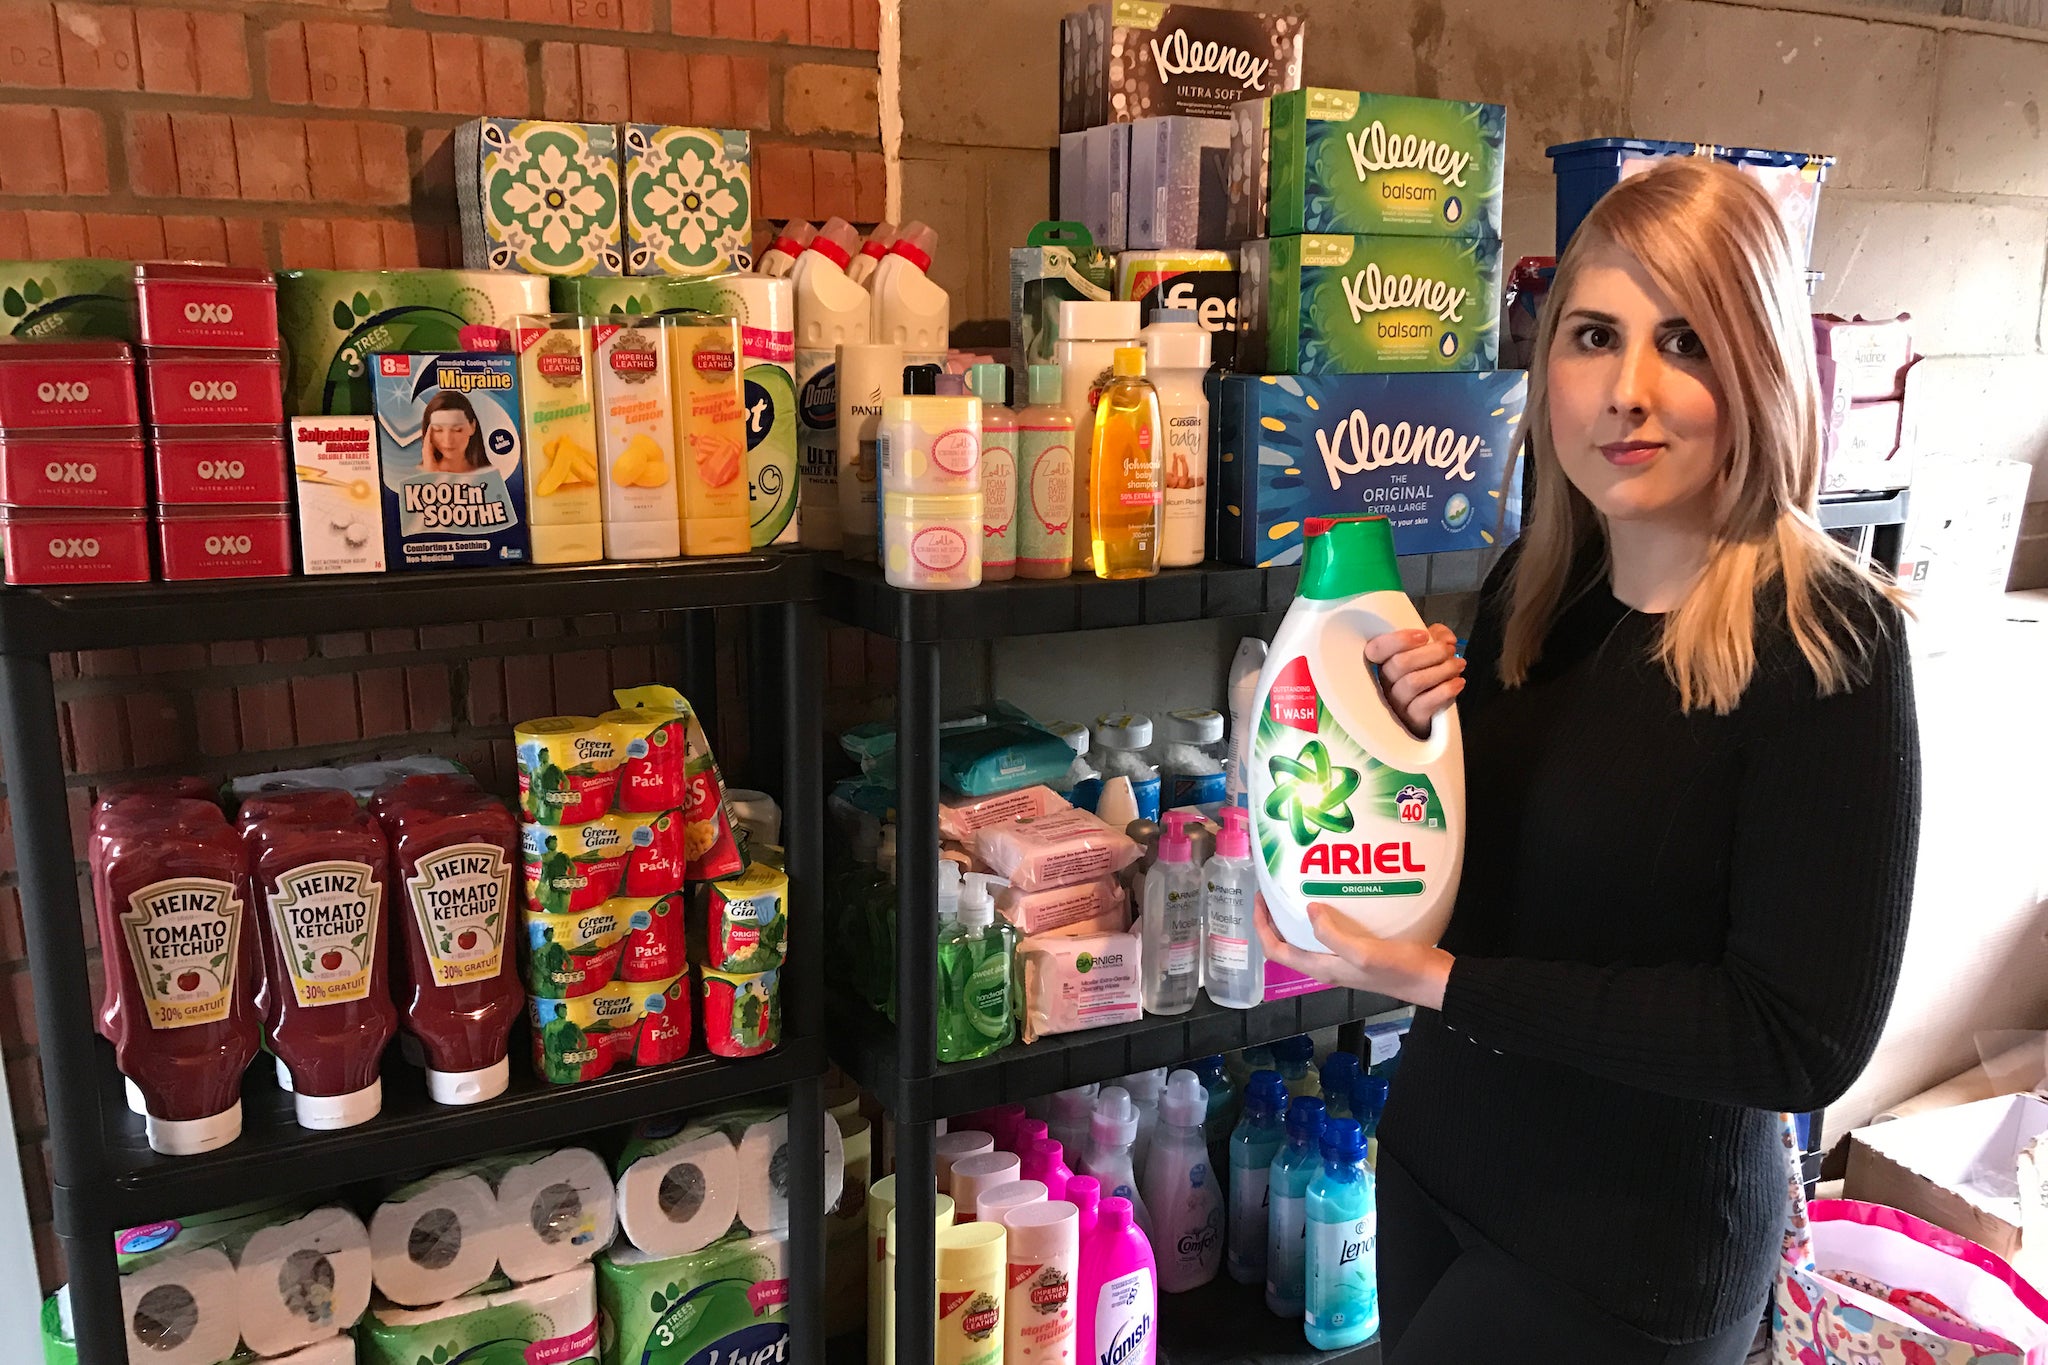 Holly Jay-Smith, whose Facebook group ‘Extreme Coupons and Bargains’ has 2.4 million members, pictured with her stockpile of non-perishables